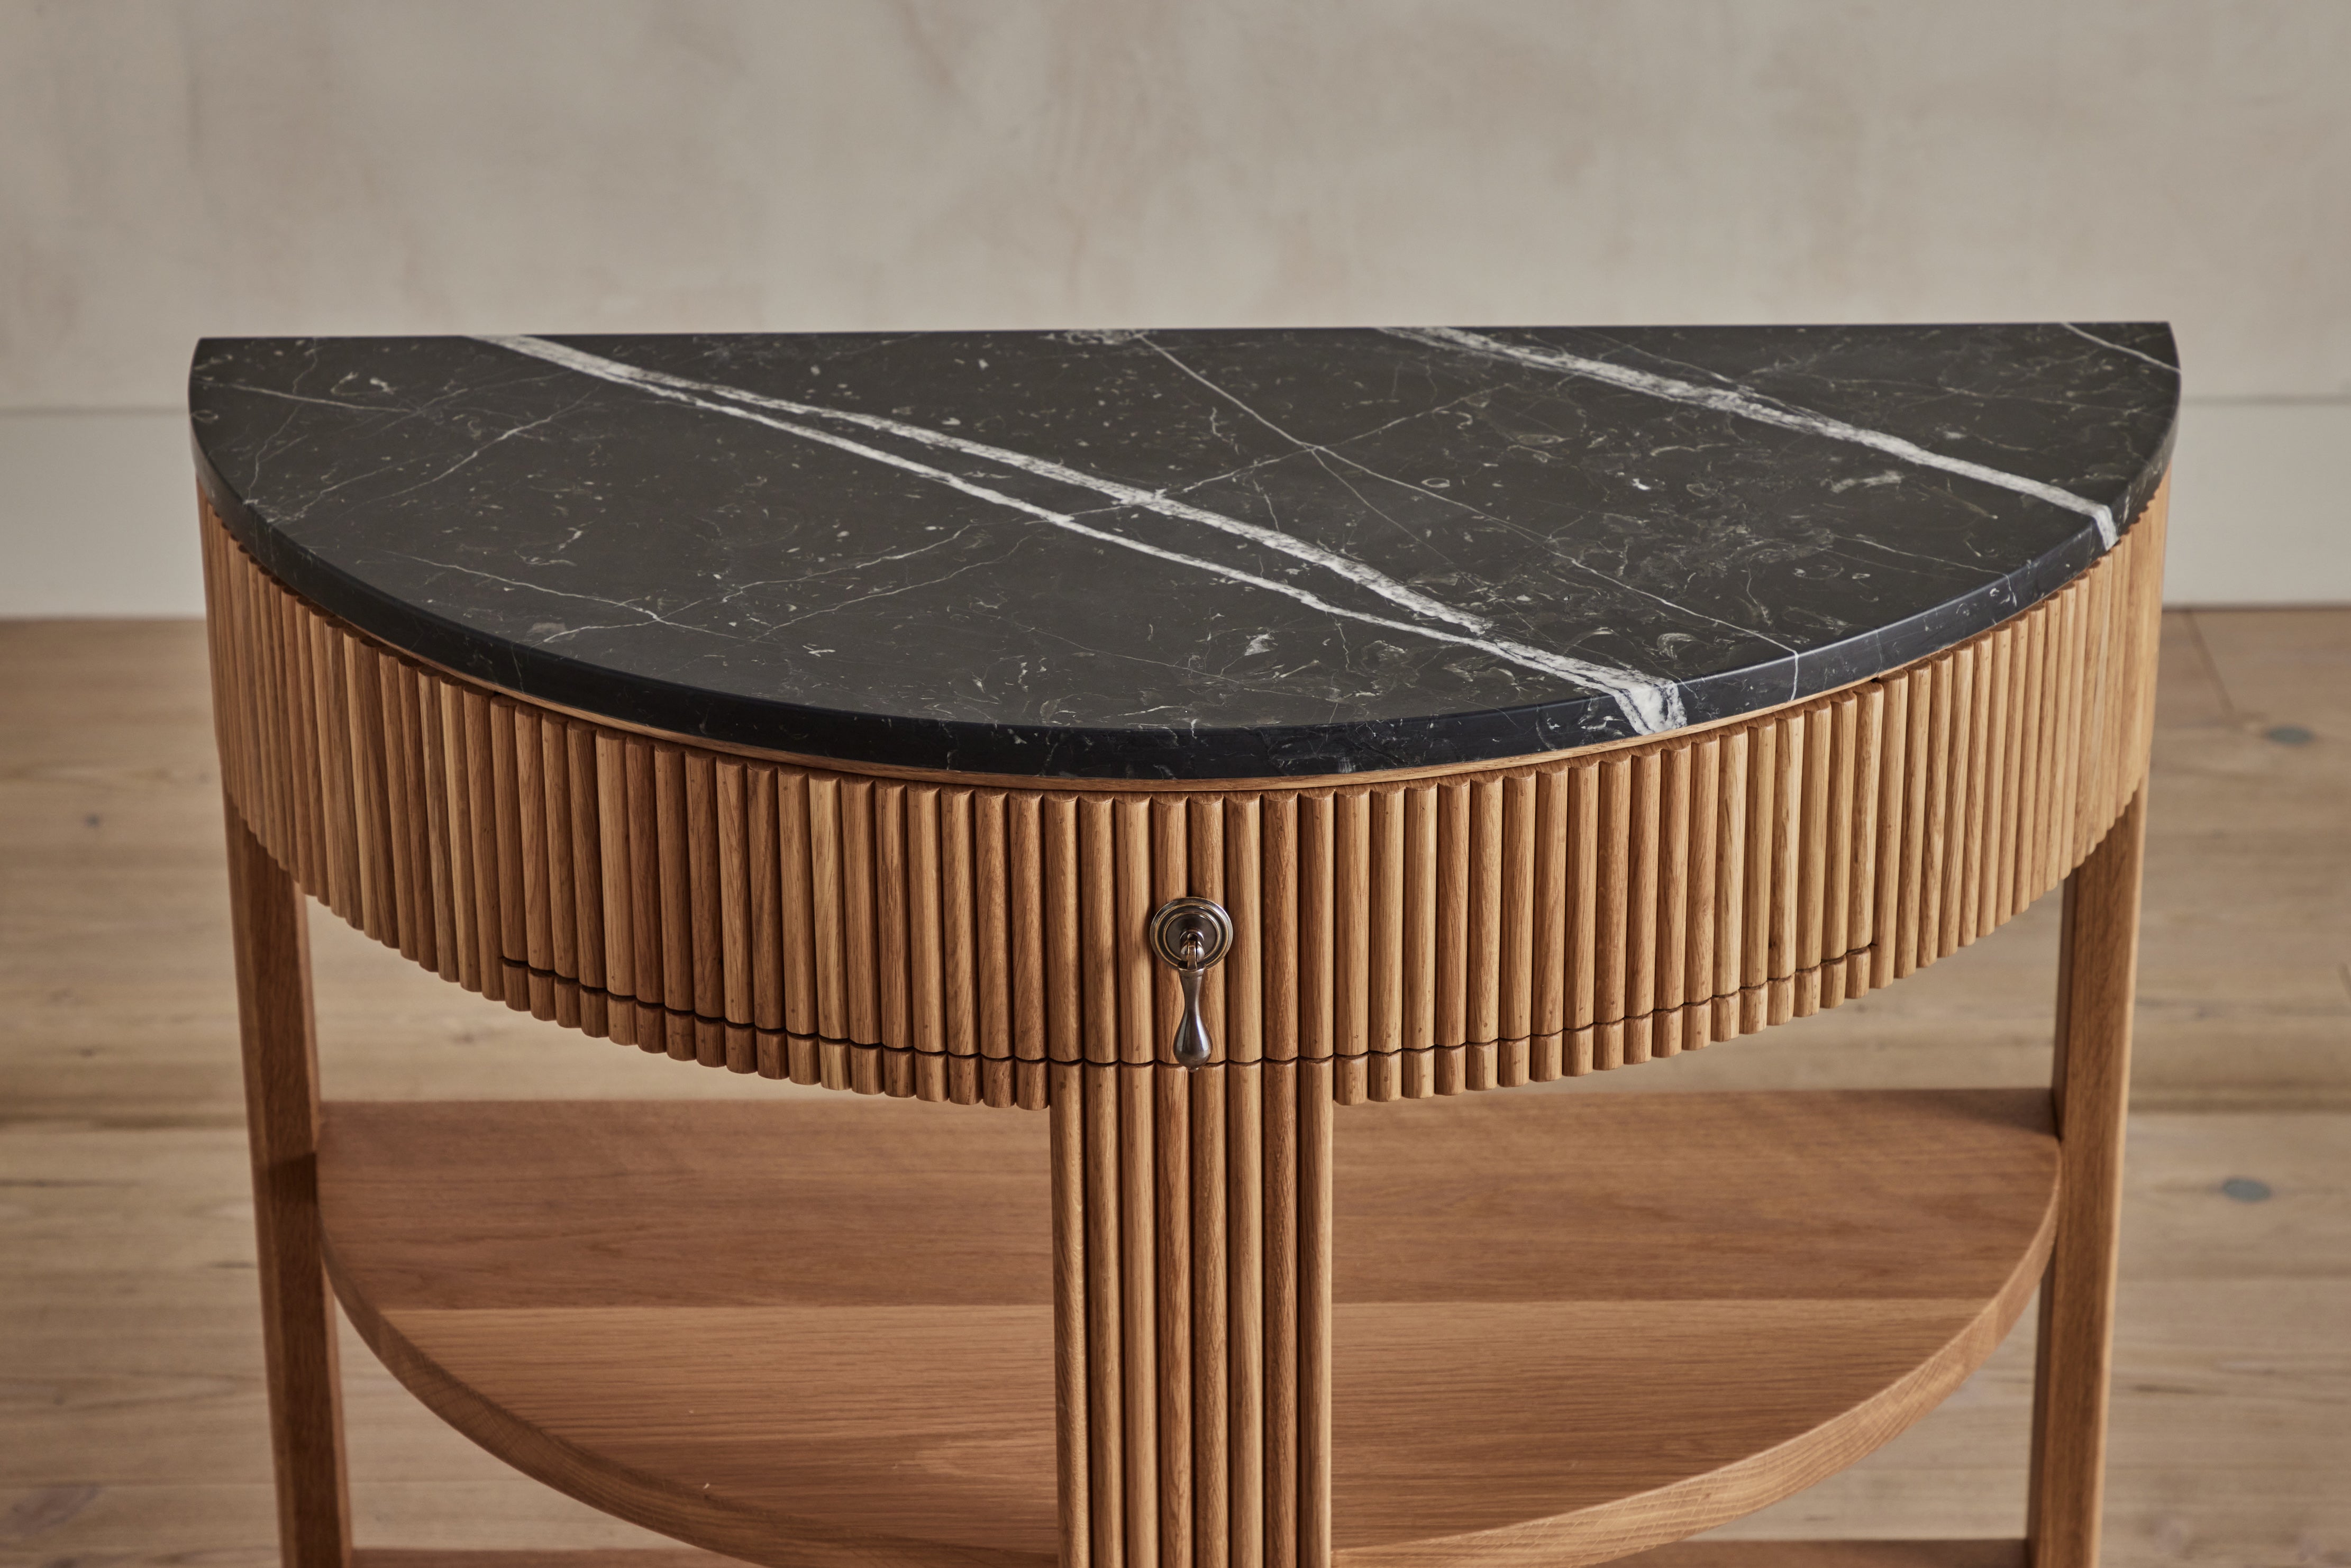 Shown in Natural Oak with Marble Top|AS SHOWN $5,800